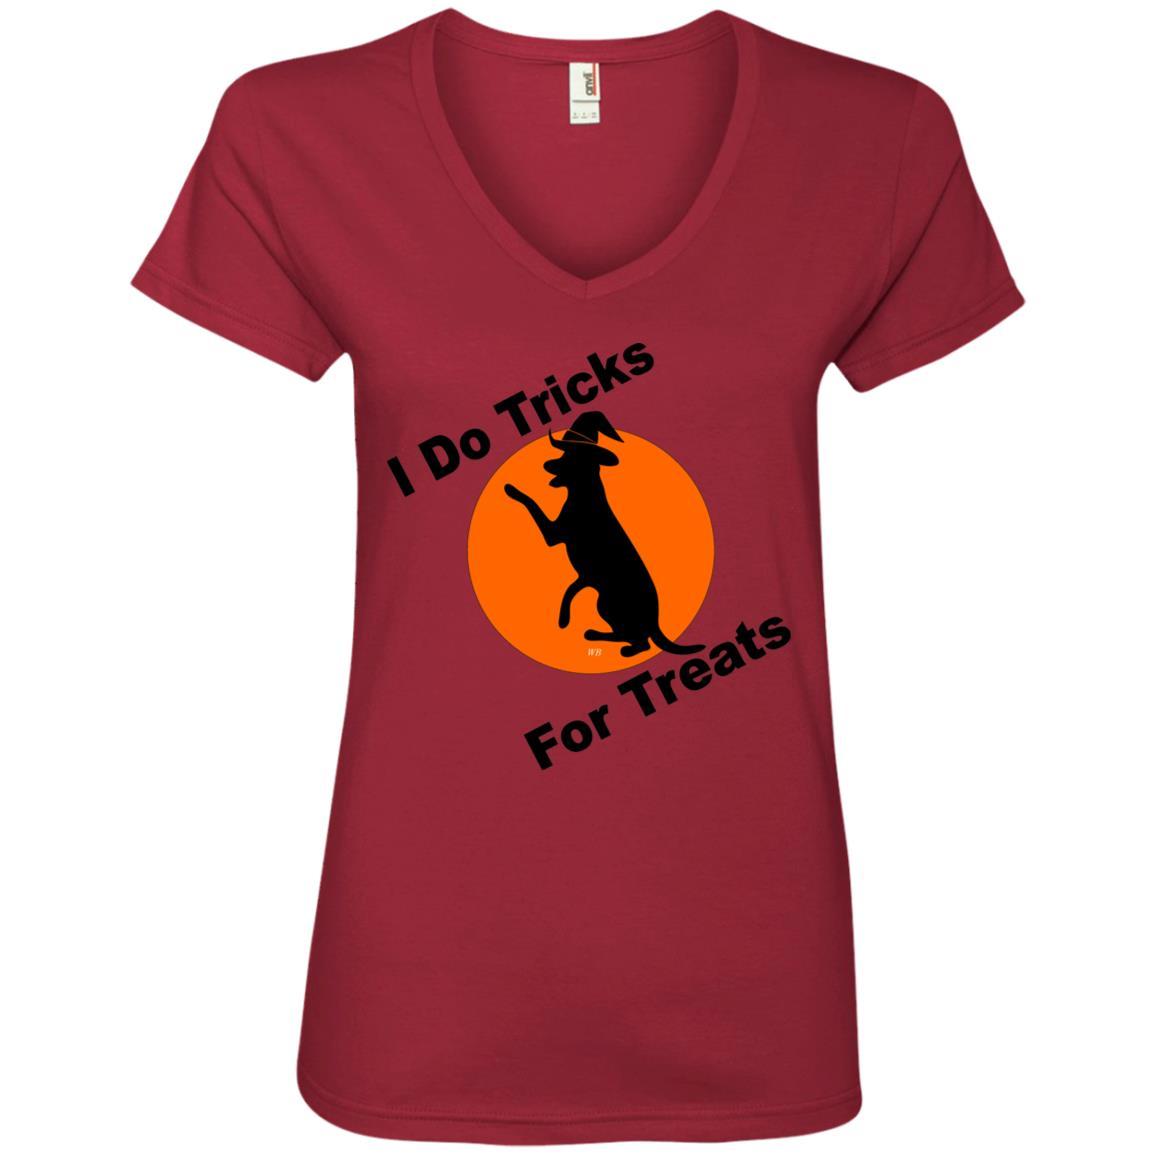 T-Shirts Independence Red / S WineyBitches.Co "I Do Tricks For Treats" Dog- Ladies' V-Neck T-Shirt WineyBitchesCo